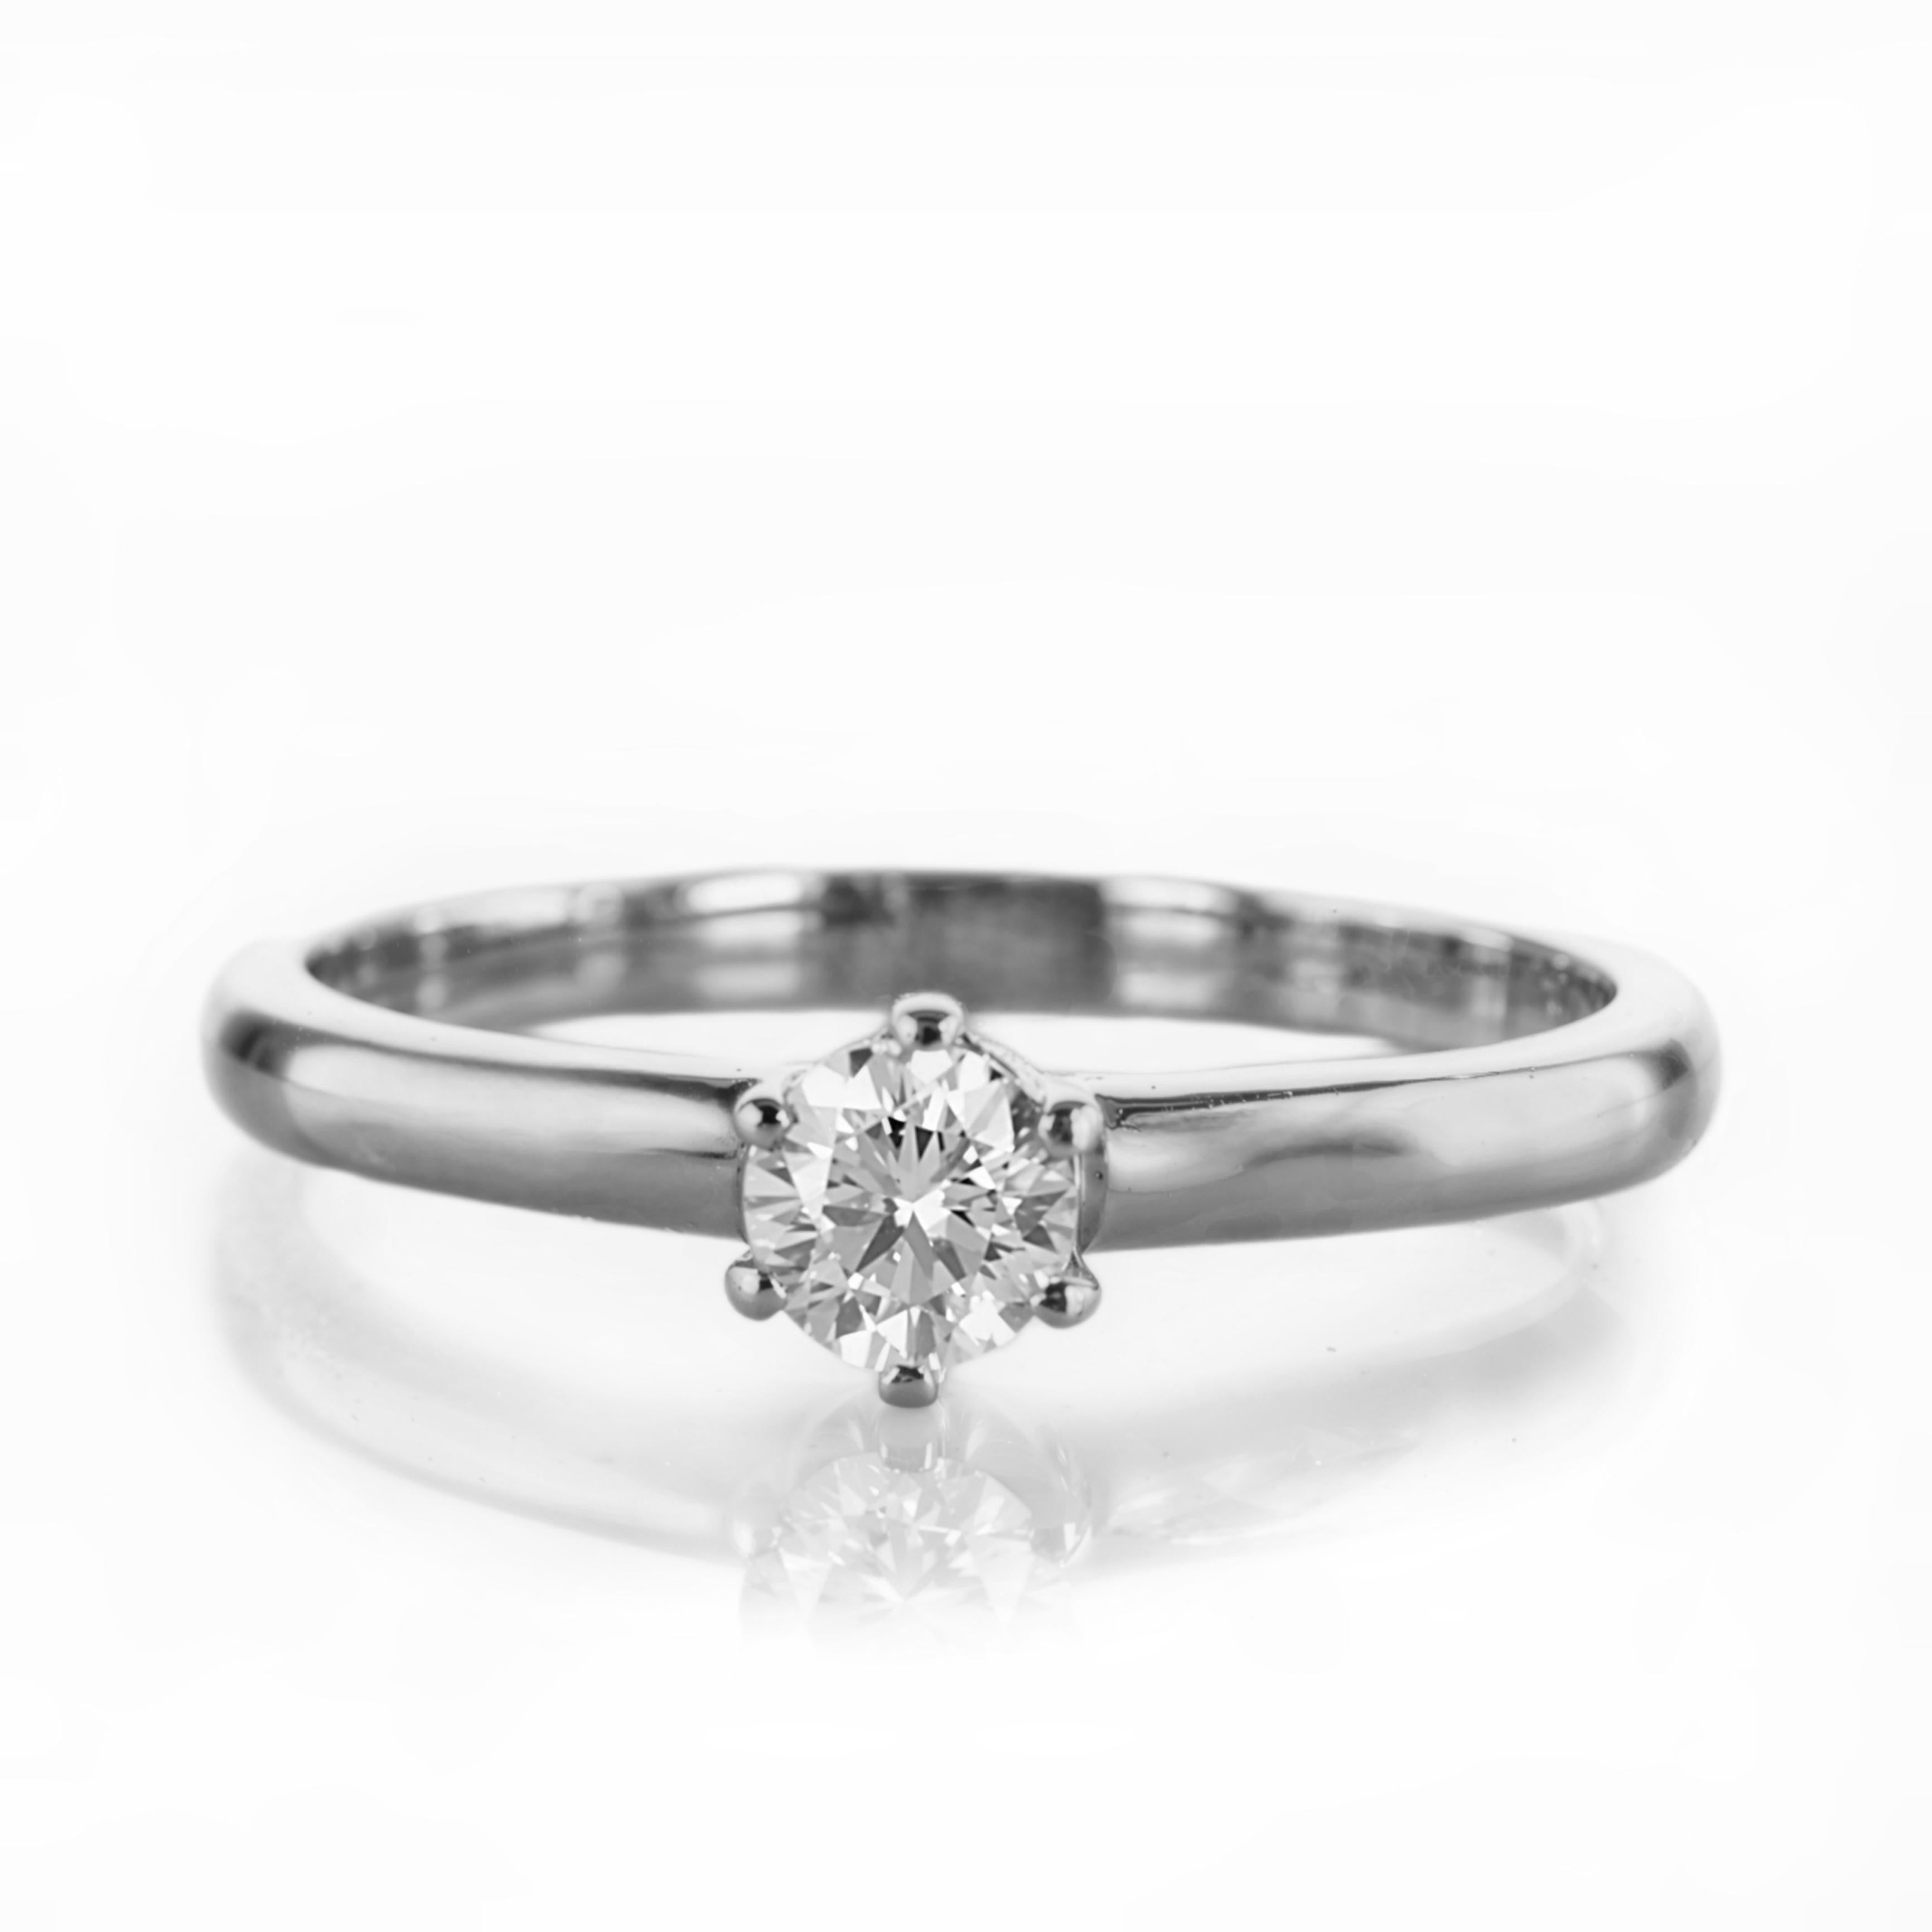 For Sale:  Stunning Classic 0.25 Carat Diamond Solitaire Ring in 14K Gold 15